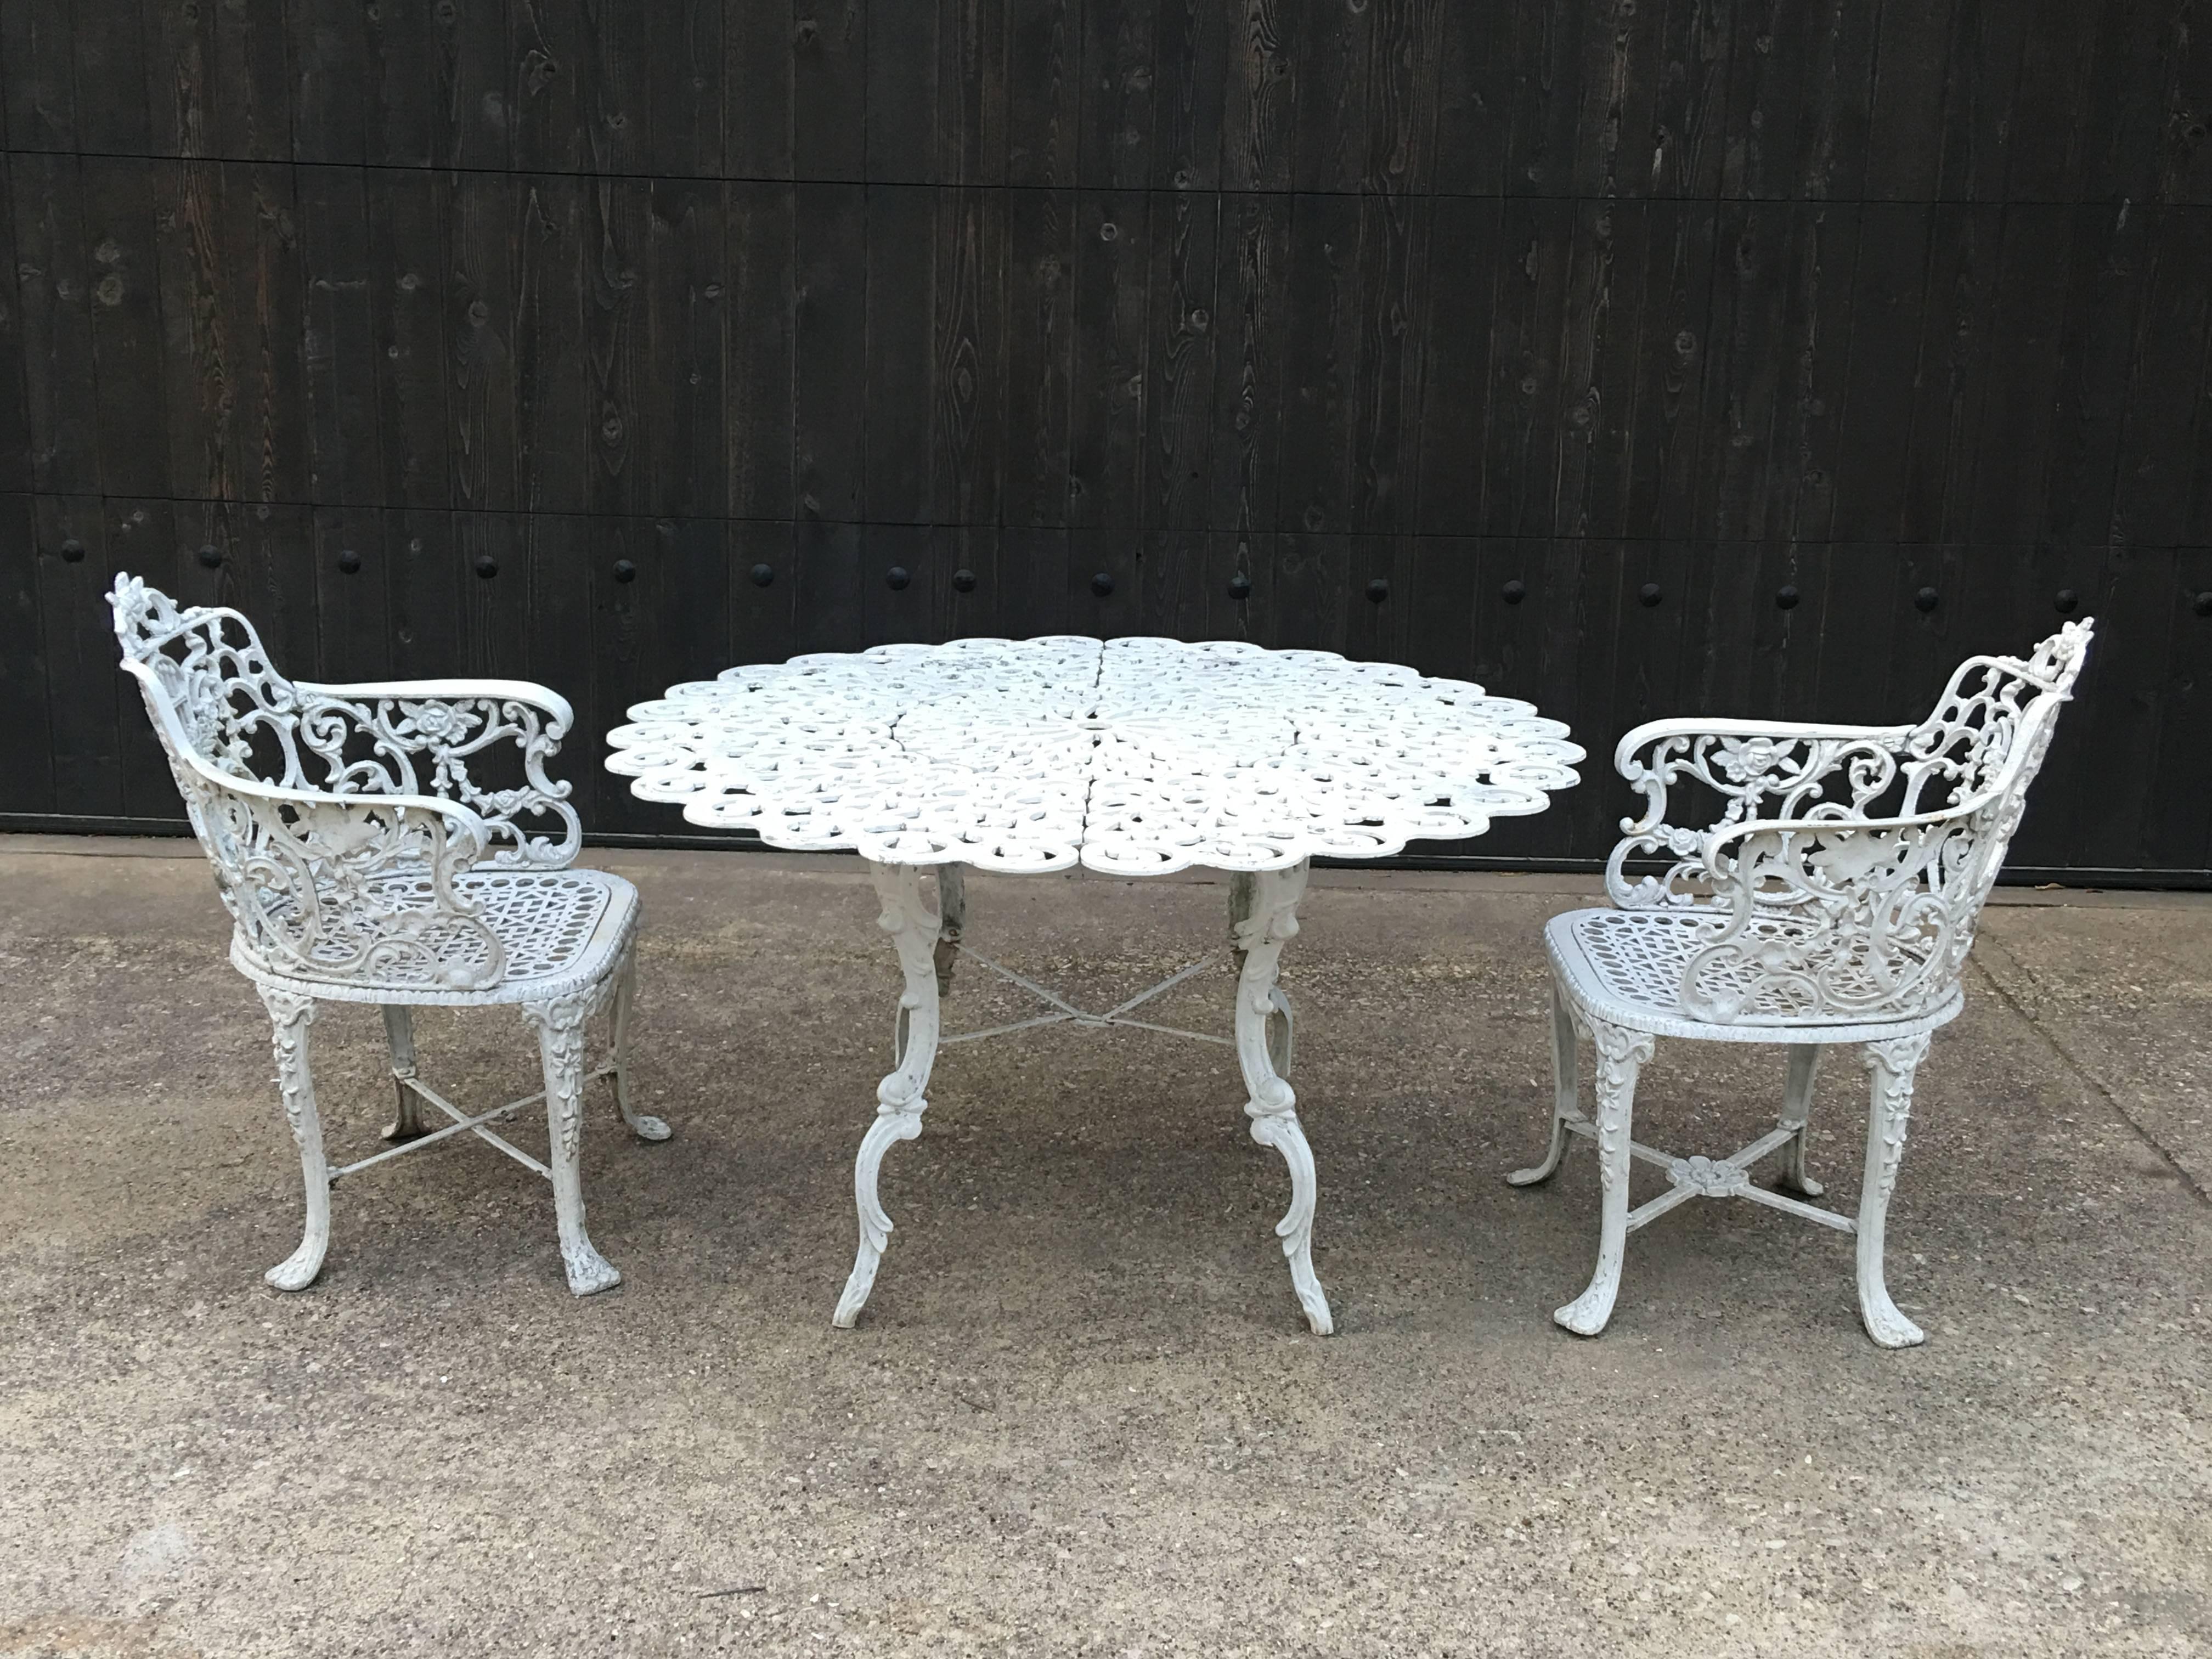 Robert wood foundry, circa 1853 heavy cast iron white painted garden set, which includes six armchairs and a round table. All cast with open foliate c -scrolling backs with lyre-style motif, cabriole legs cast with bell flowers. Each chair is